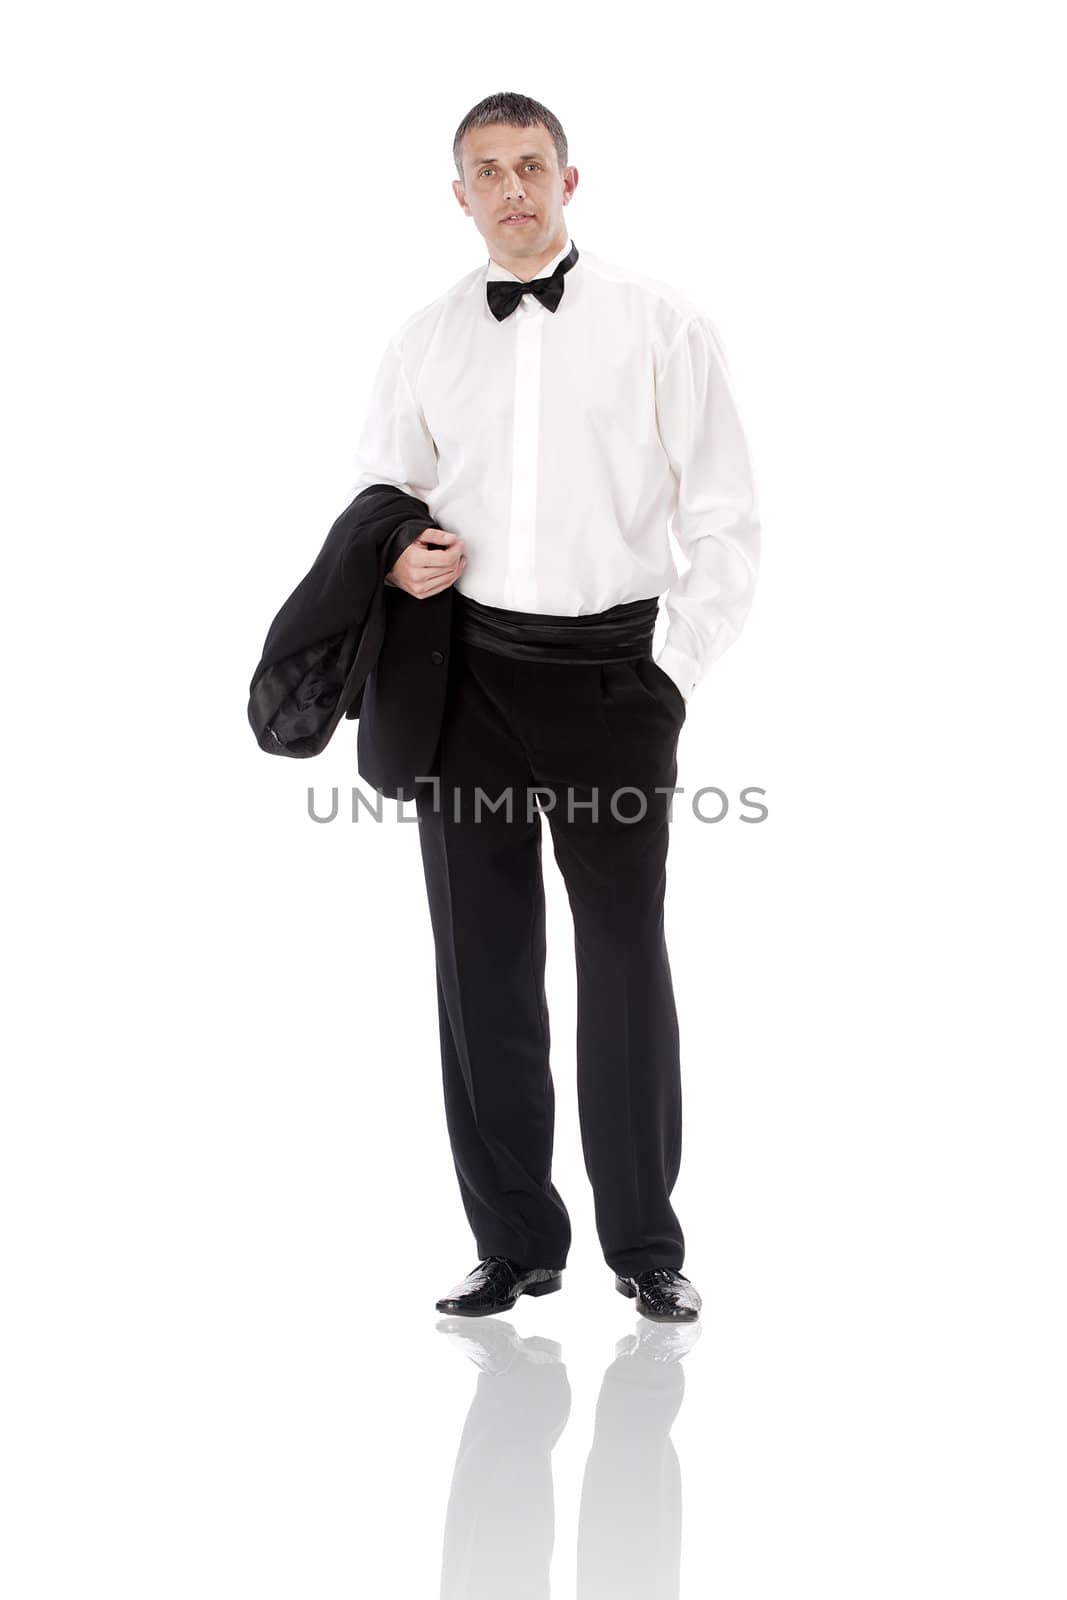 The elegant man in a classical tuxedo on a white background